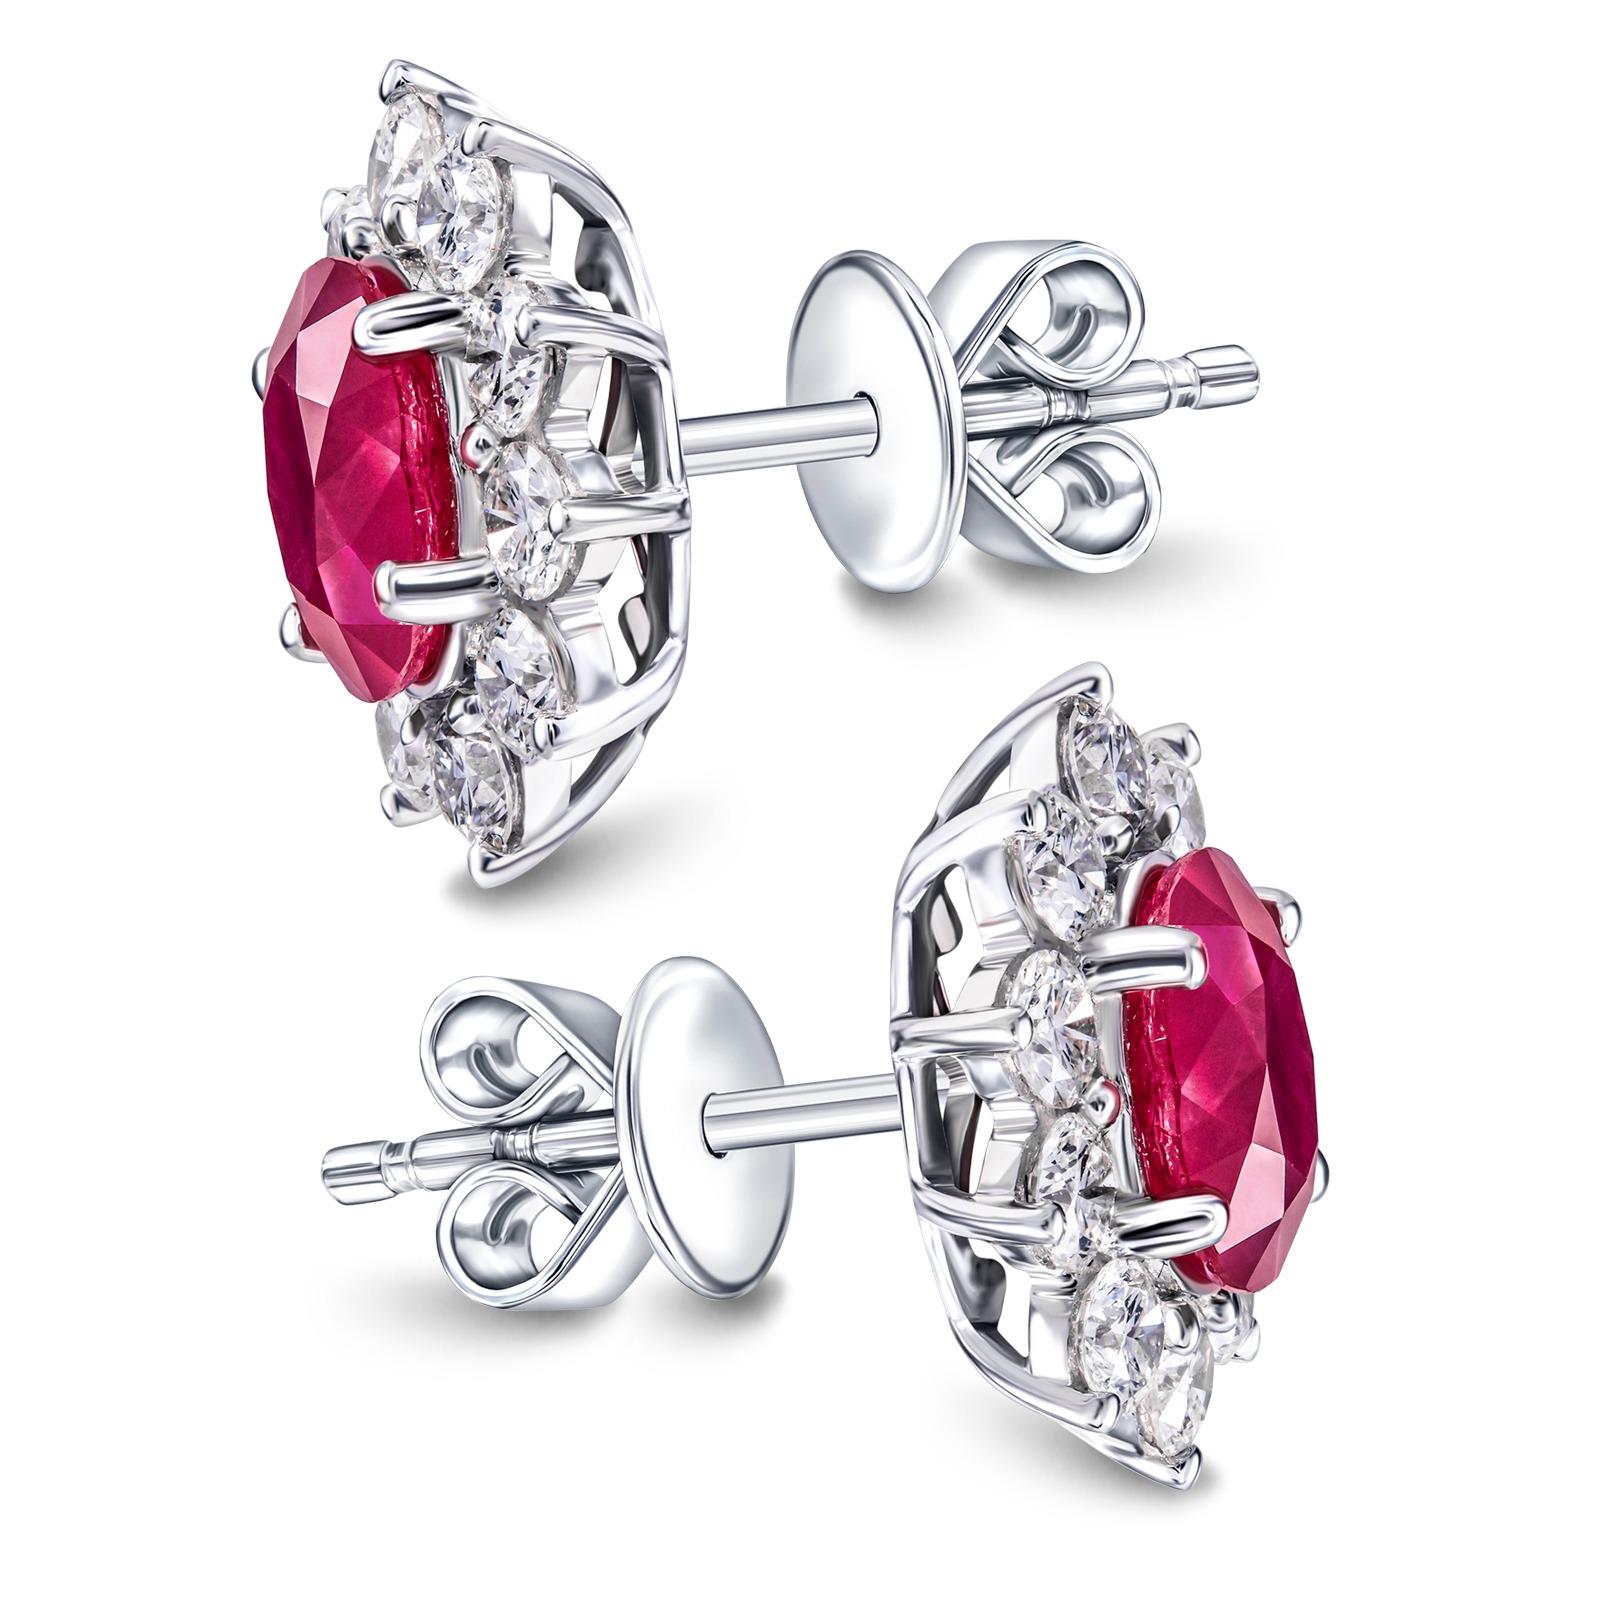 Elegant and striking 1.60 Carat total diamond and ruby Cluster earrings, The radiant oval ruby in the centre on each earring is surrounded by 10 white stunning diamonds, 20 diamonds for both, weighing a total of 0.60 carat color G/H clarity SI, the